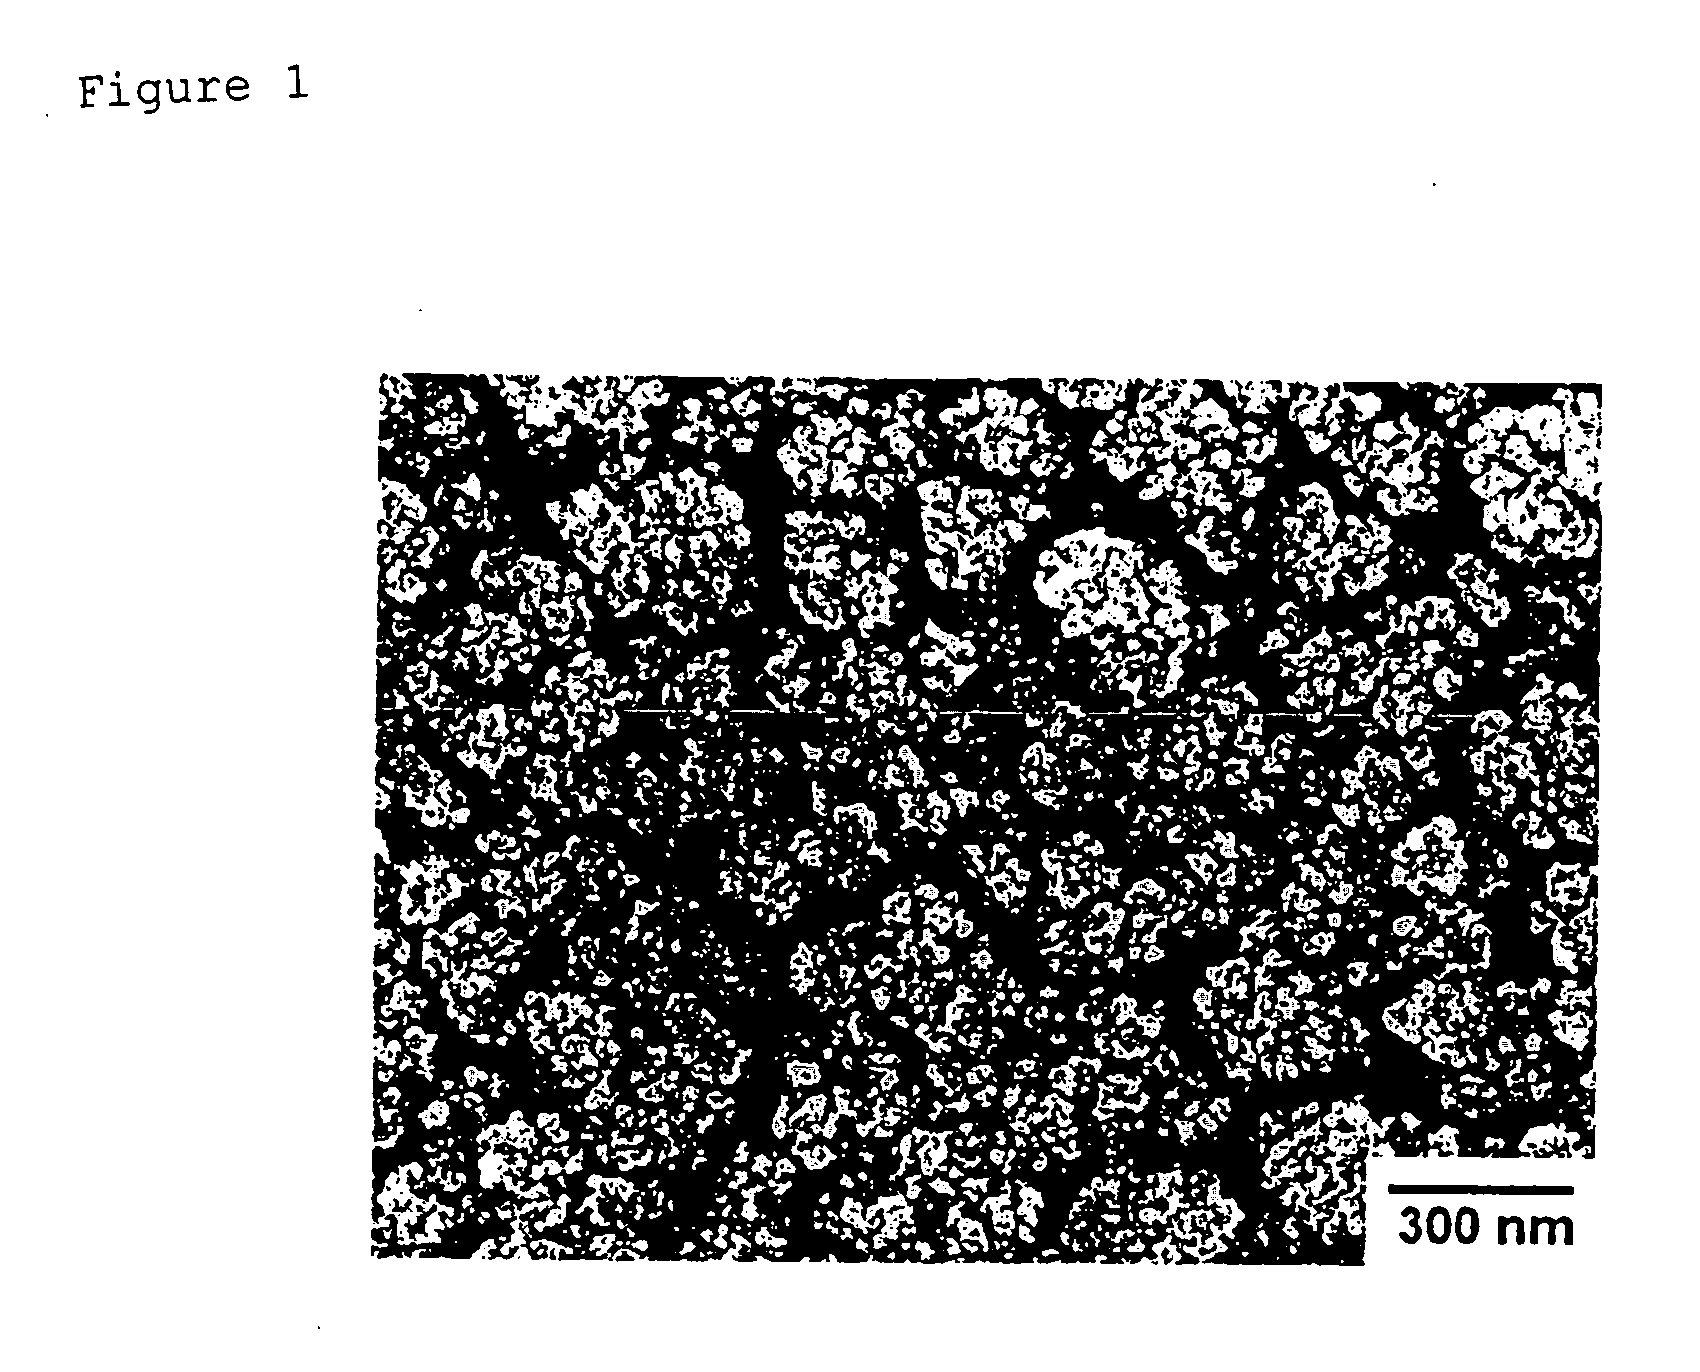 Method for manufacturing manganese oxide nanostructure and oxygen reduction electrode using said manganese oxide nanostructure